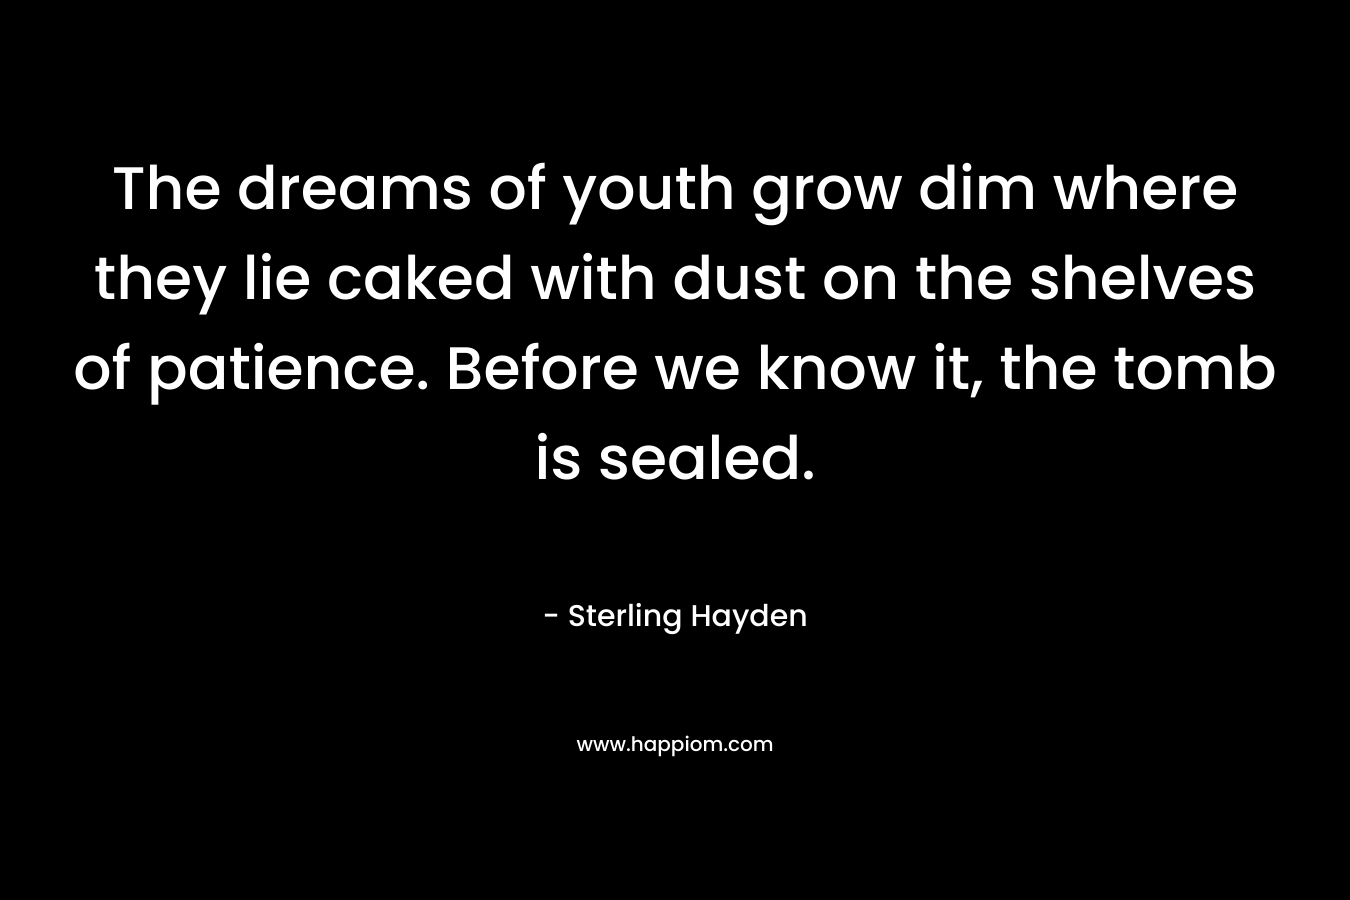 The dreams of youth grow dim where they lie caked with dust on the shelves of patience. Before we know it, the tomb is sealed. – Sterling Hayden